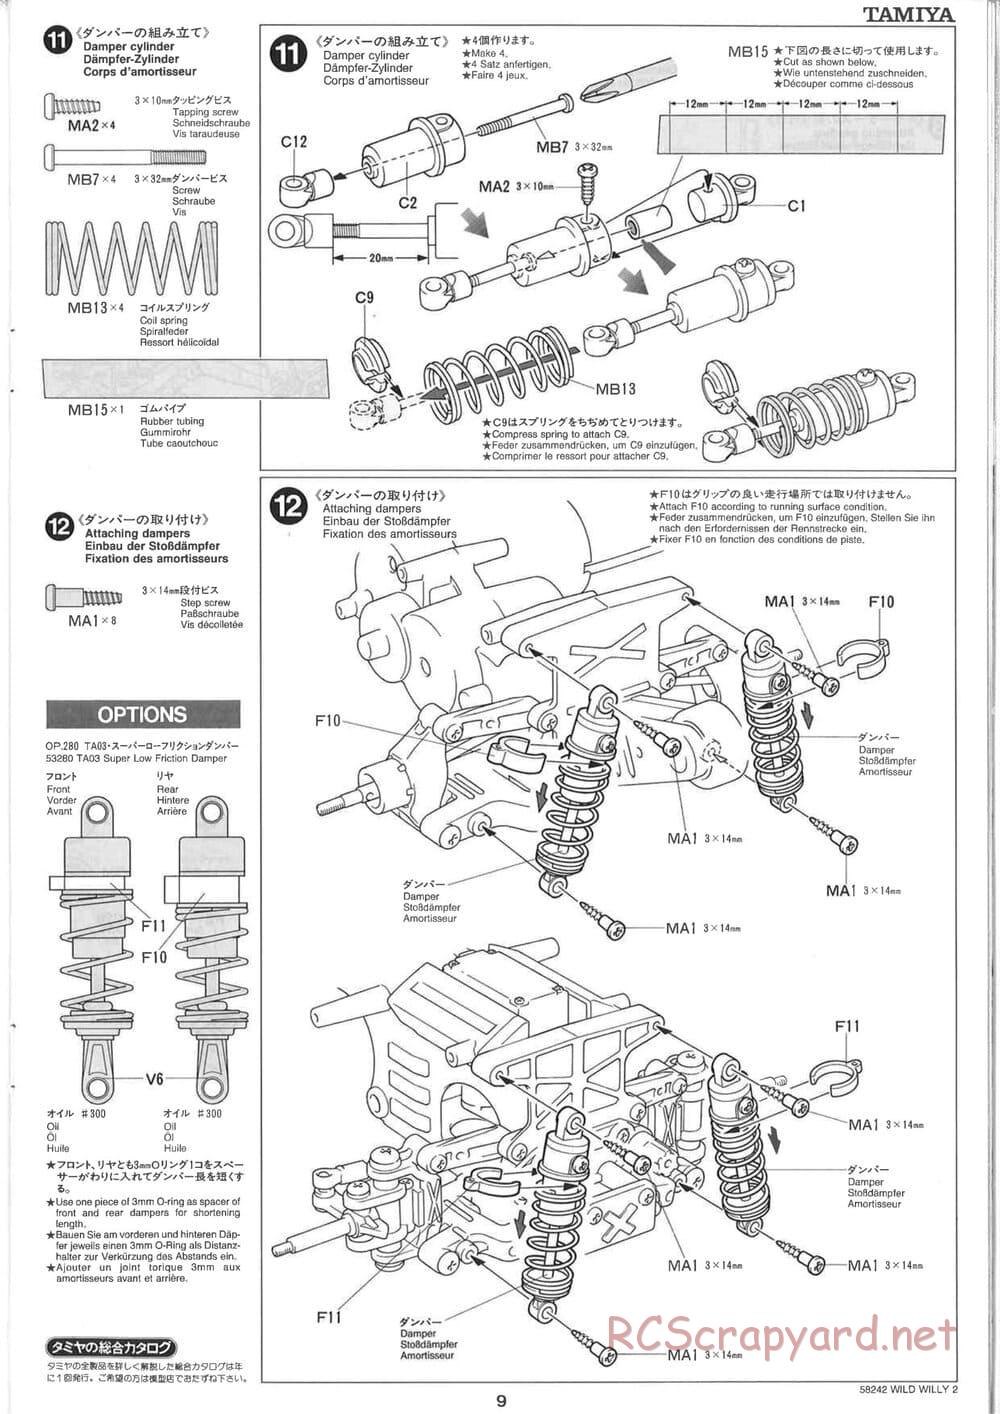 Tamiya - Wild Willy 2 - WR-02 Chassis - Manual - Page 9